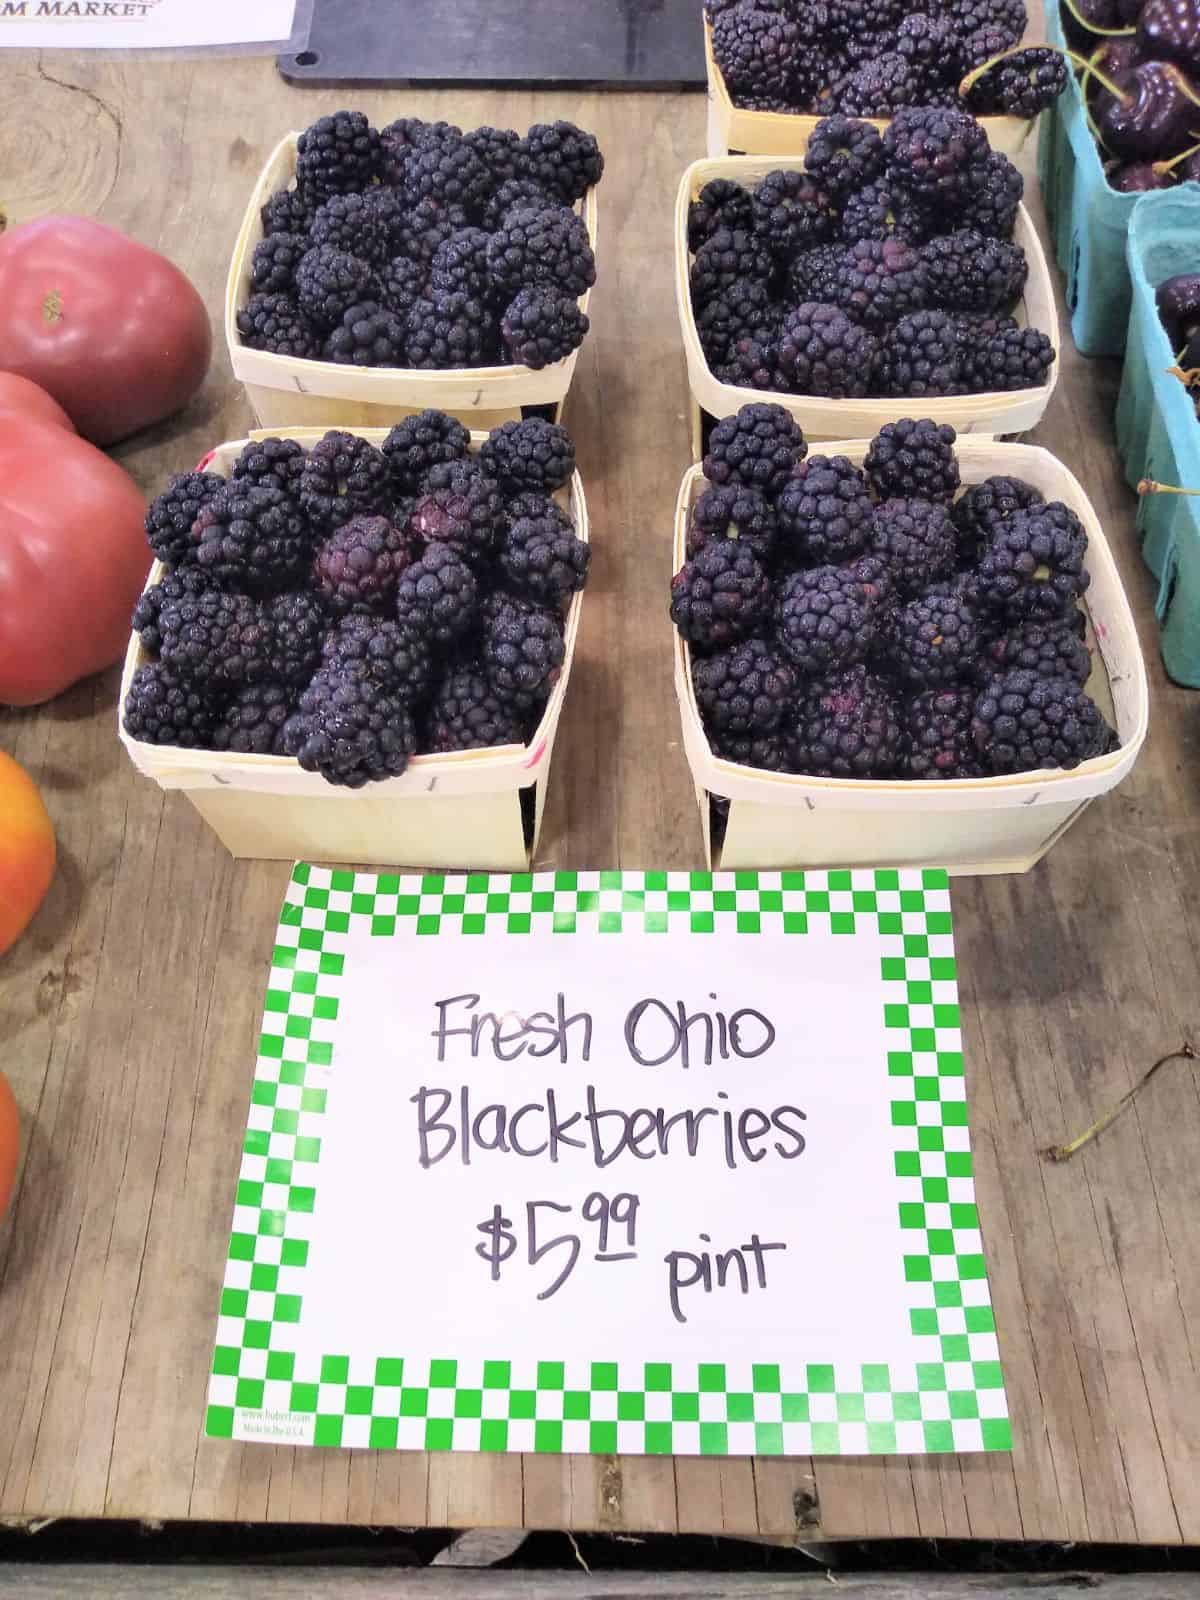 A table of pints of Fresh Ohio blackberries on a table at a farmer's market selling for $5.99 each.